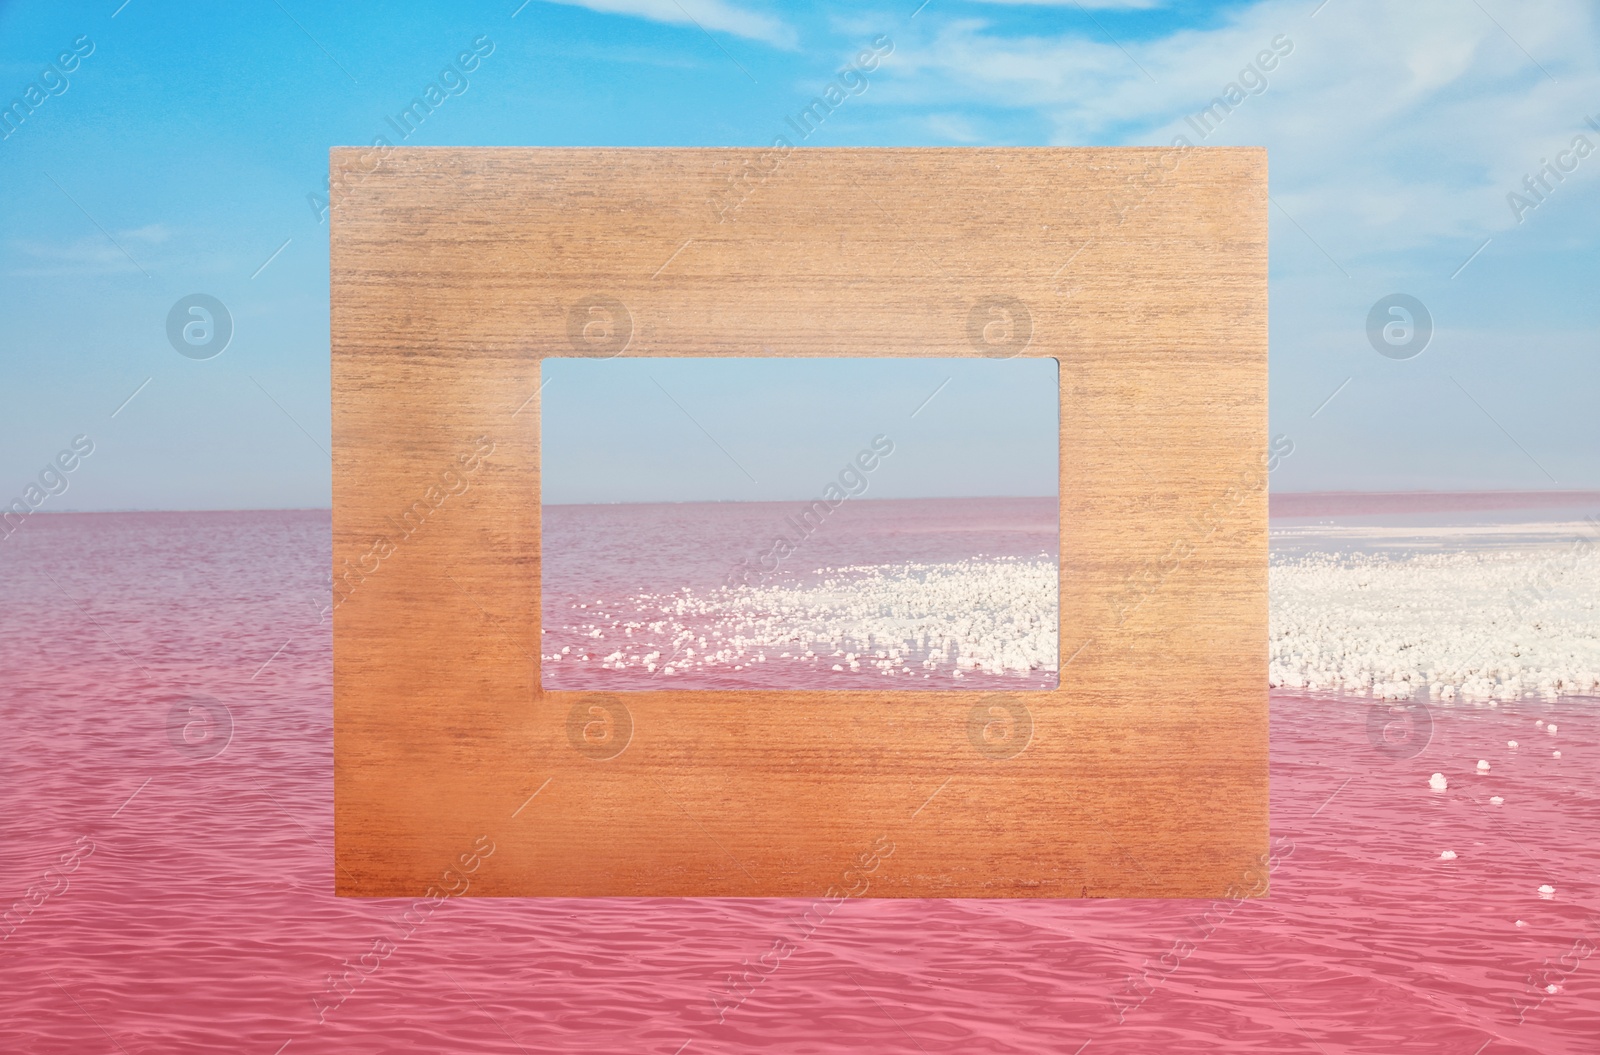 Image of Wooden frame and beautiful pink lake under blue sky with clouds